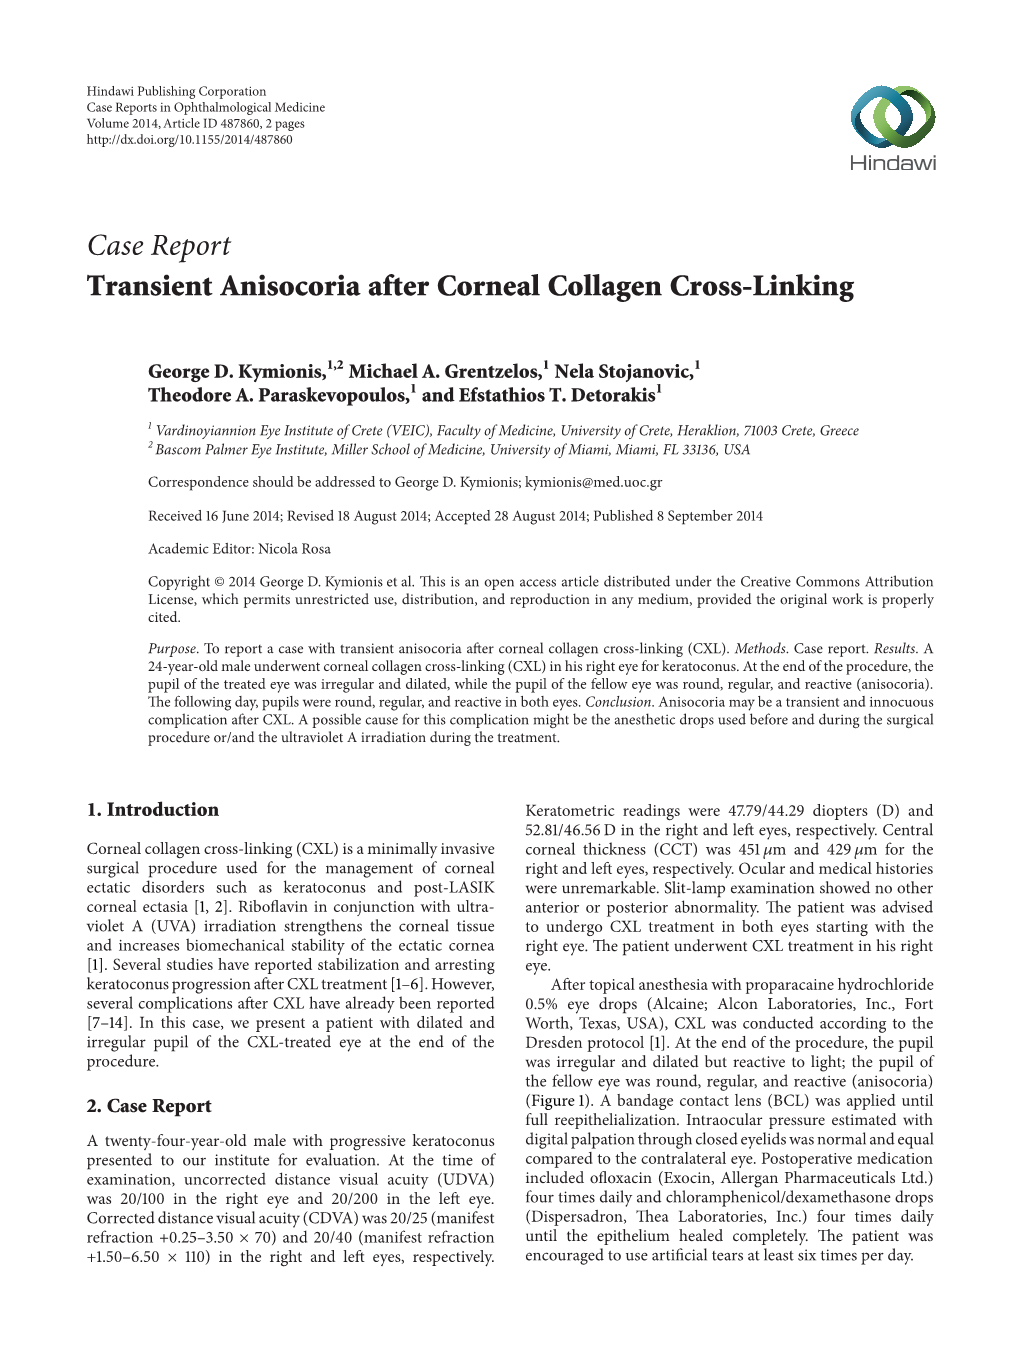 Transient Anisocoria After Corneal Collagen Cross-Linking